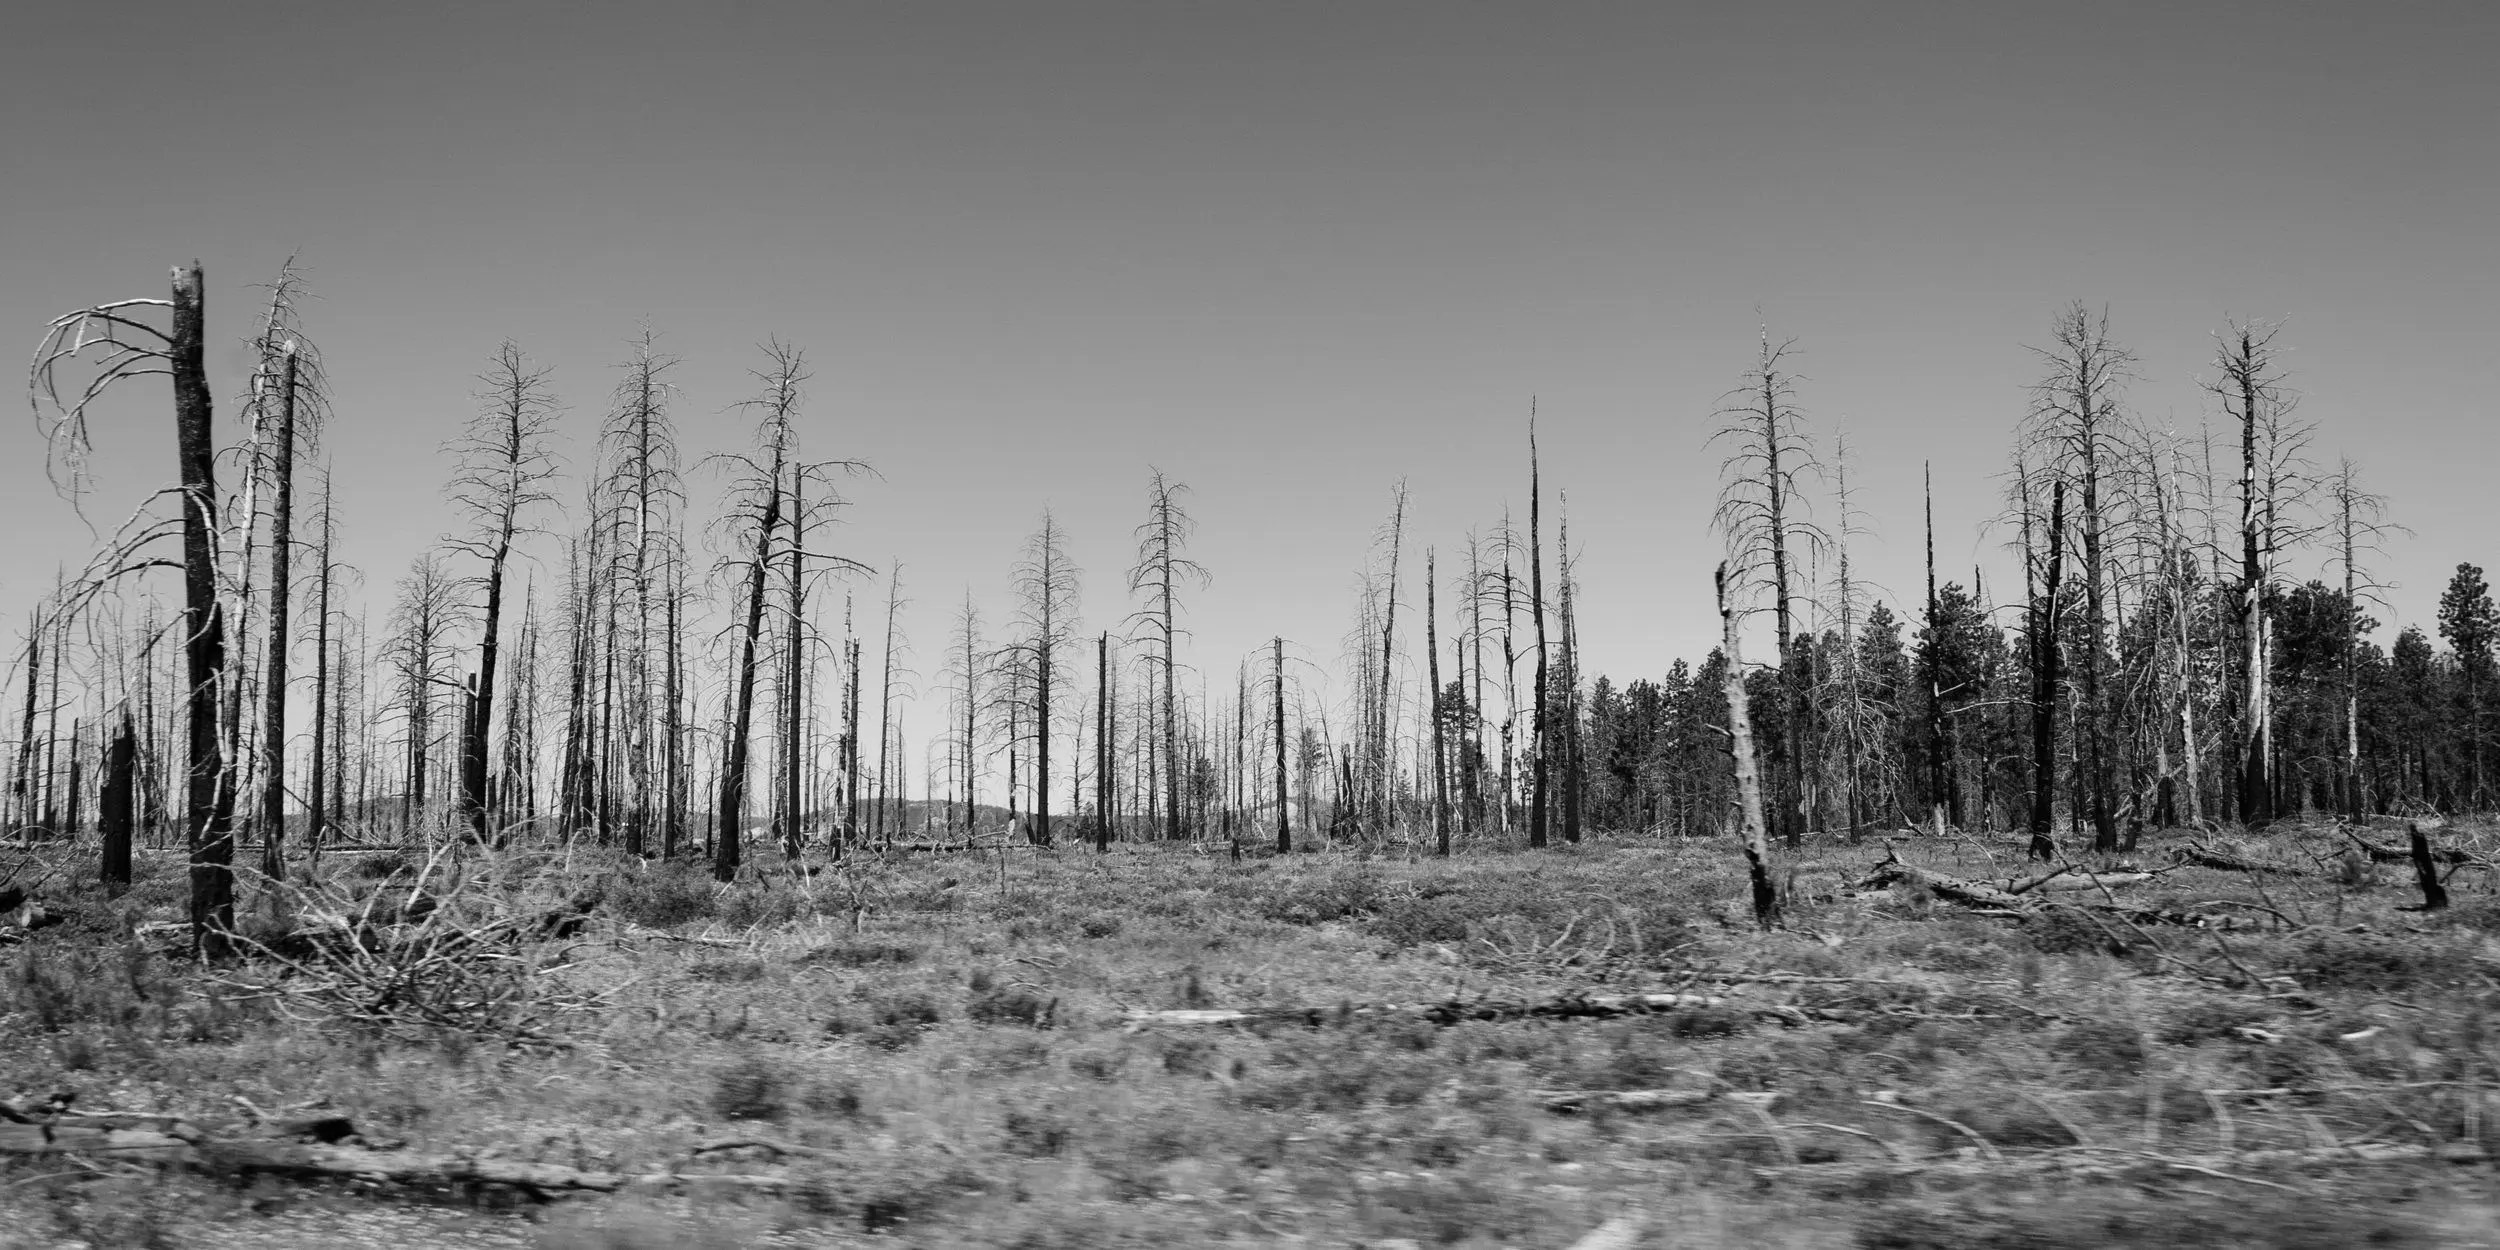 Black and white charred remains of Bryce Canyon's burned trees.